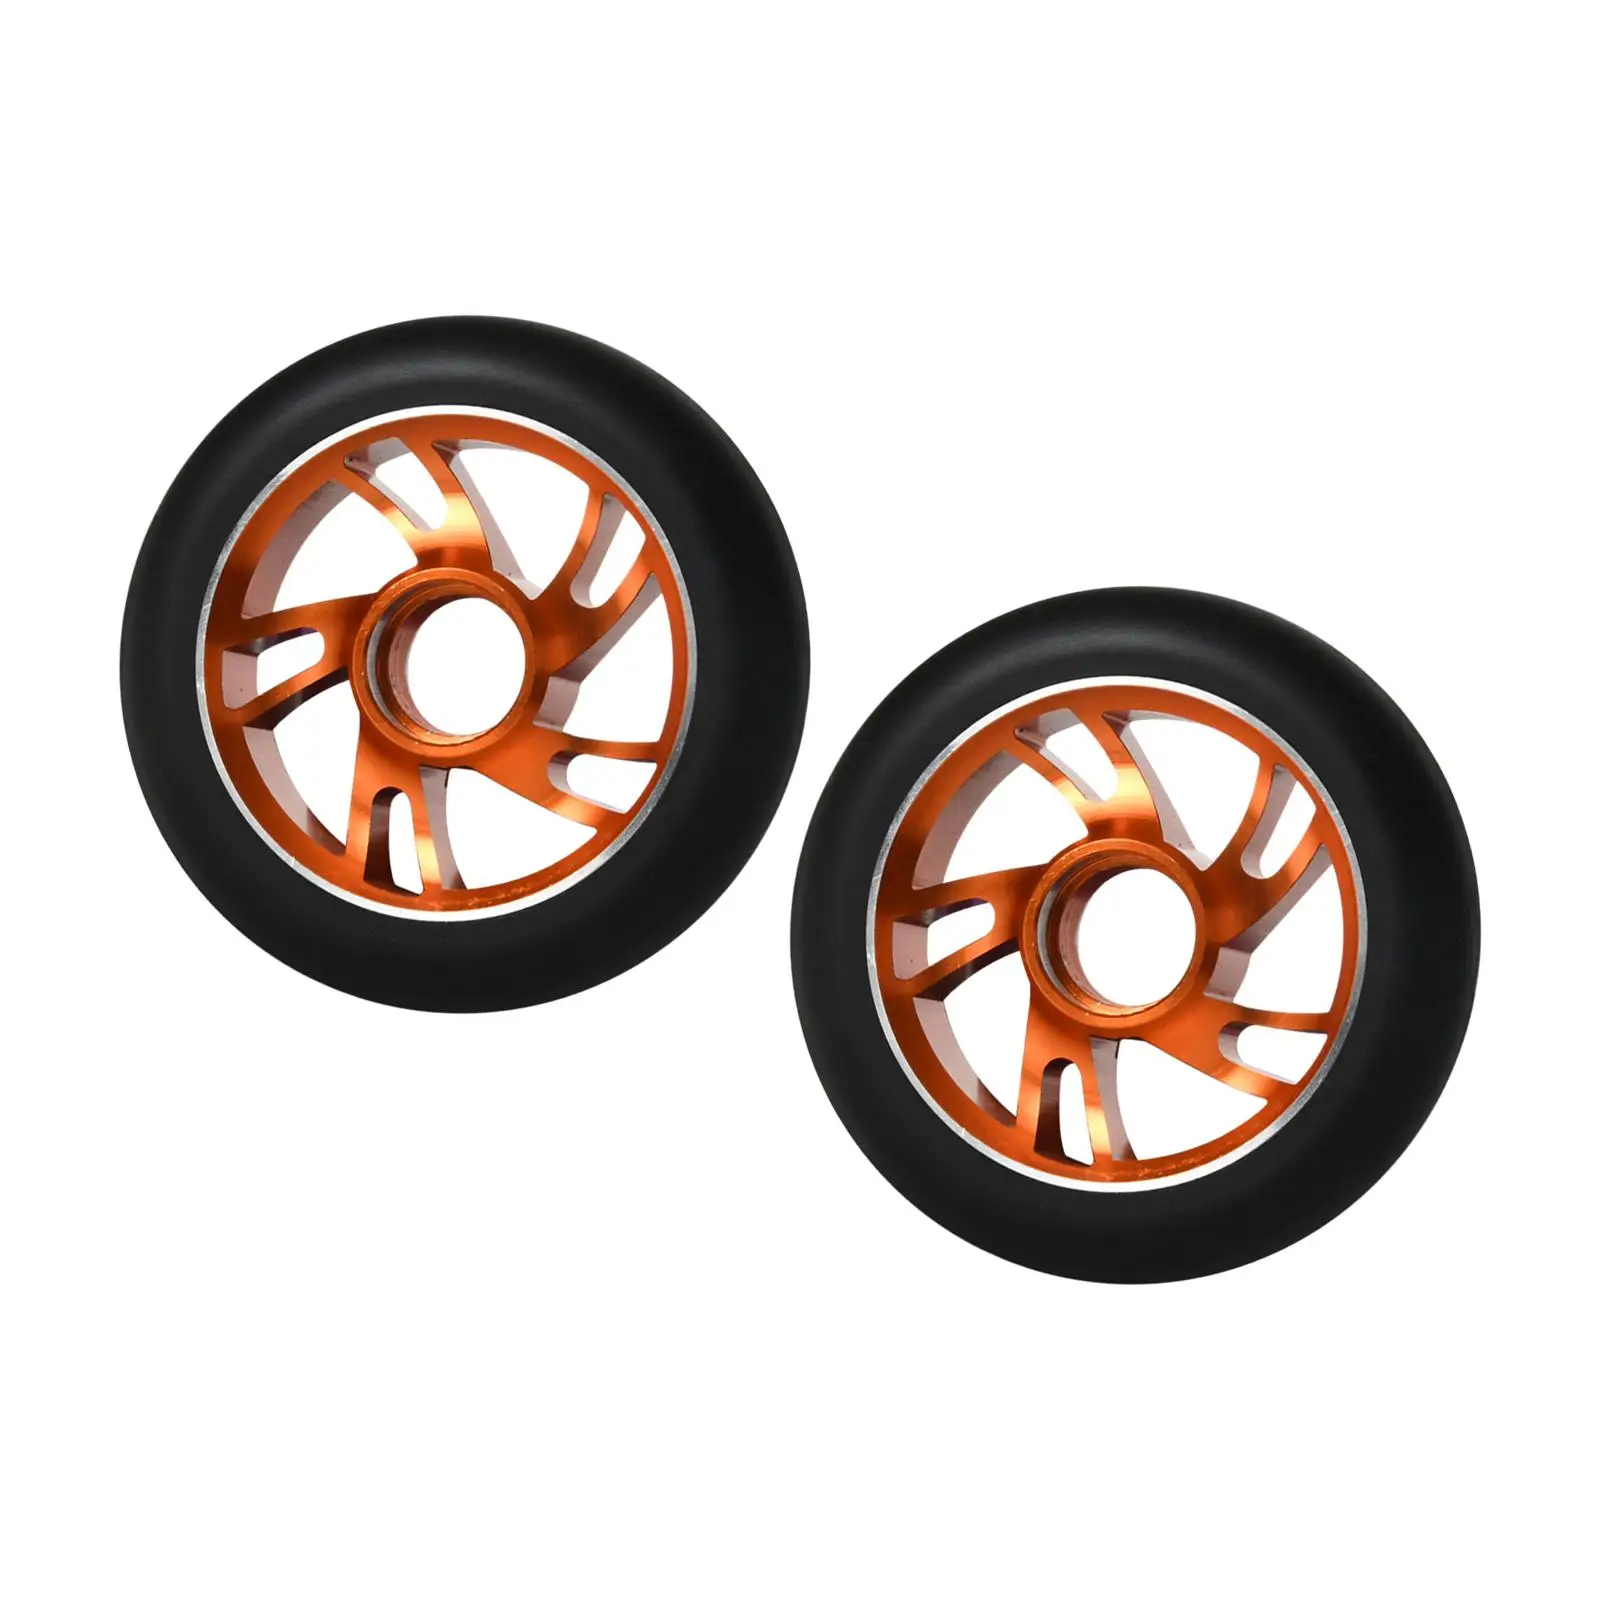 2x Scooter Replacement Wheels Spare Parts Wear Resistant Professional 100mm